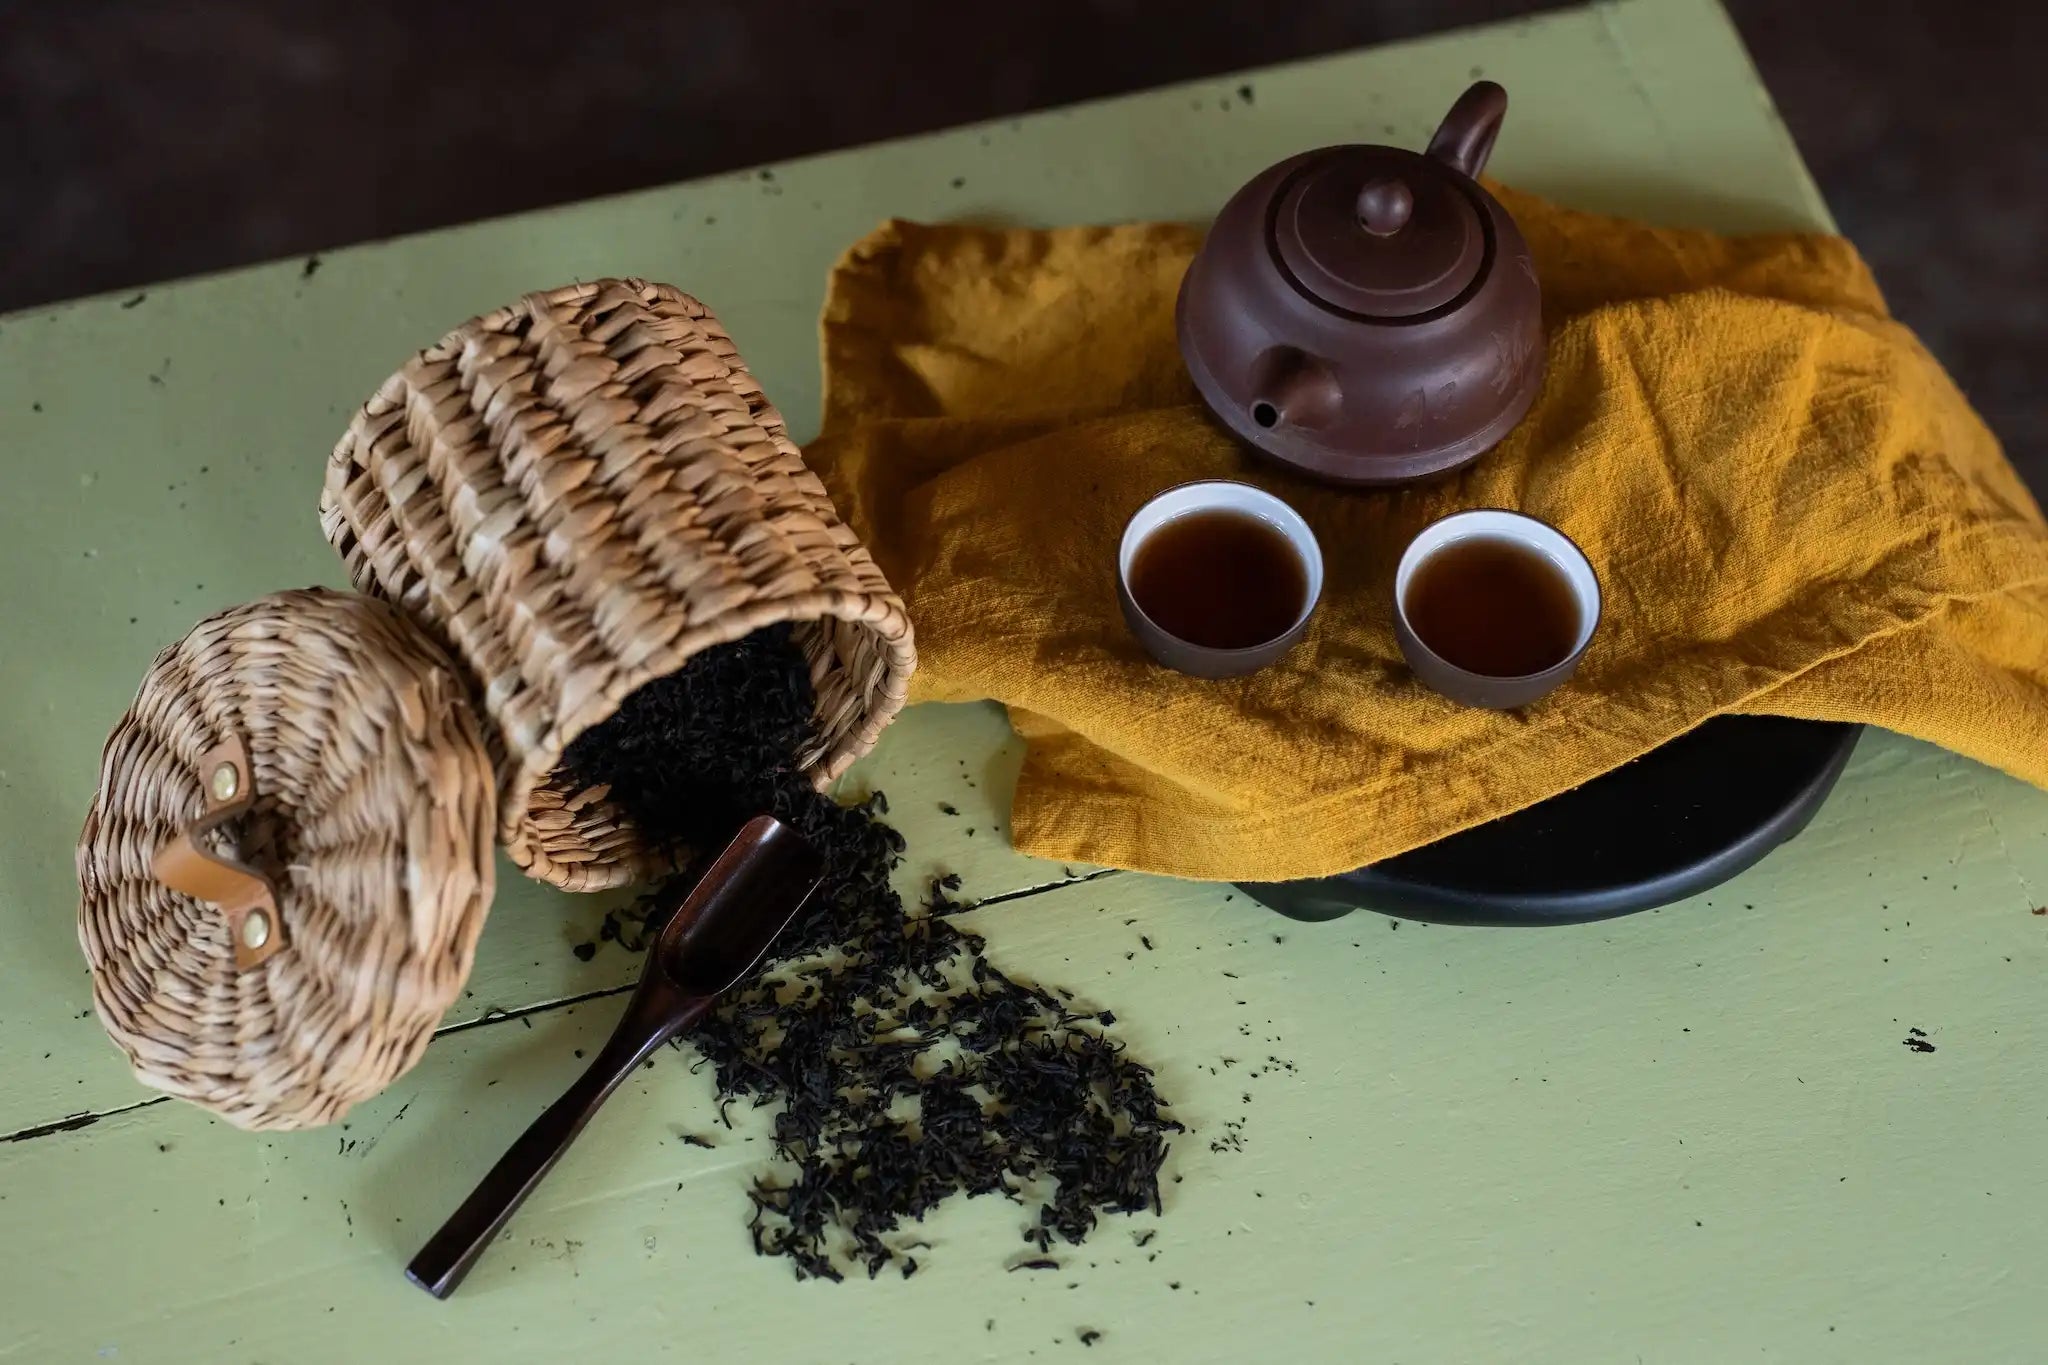 2020 Jeju aged shou puer stype tea spilled from basket next to yixing pot of tea and two small cups